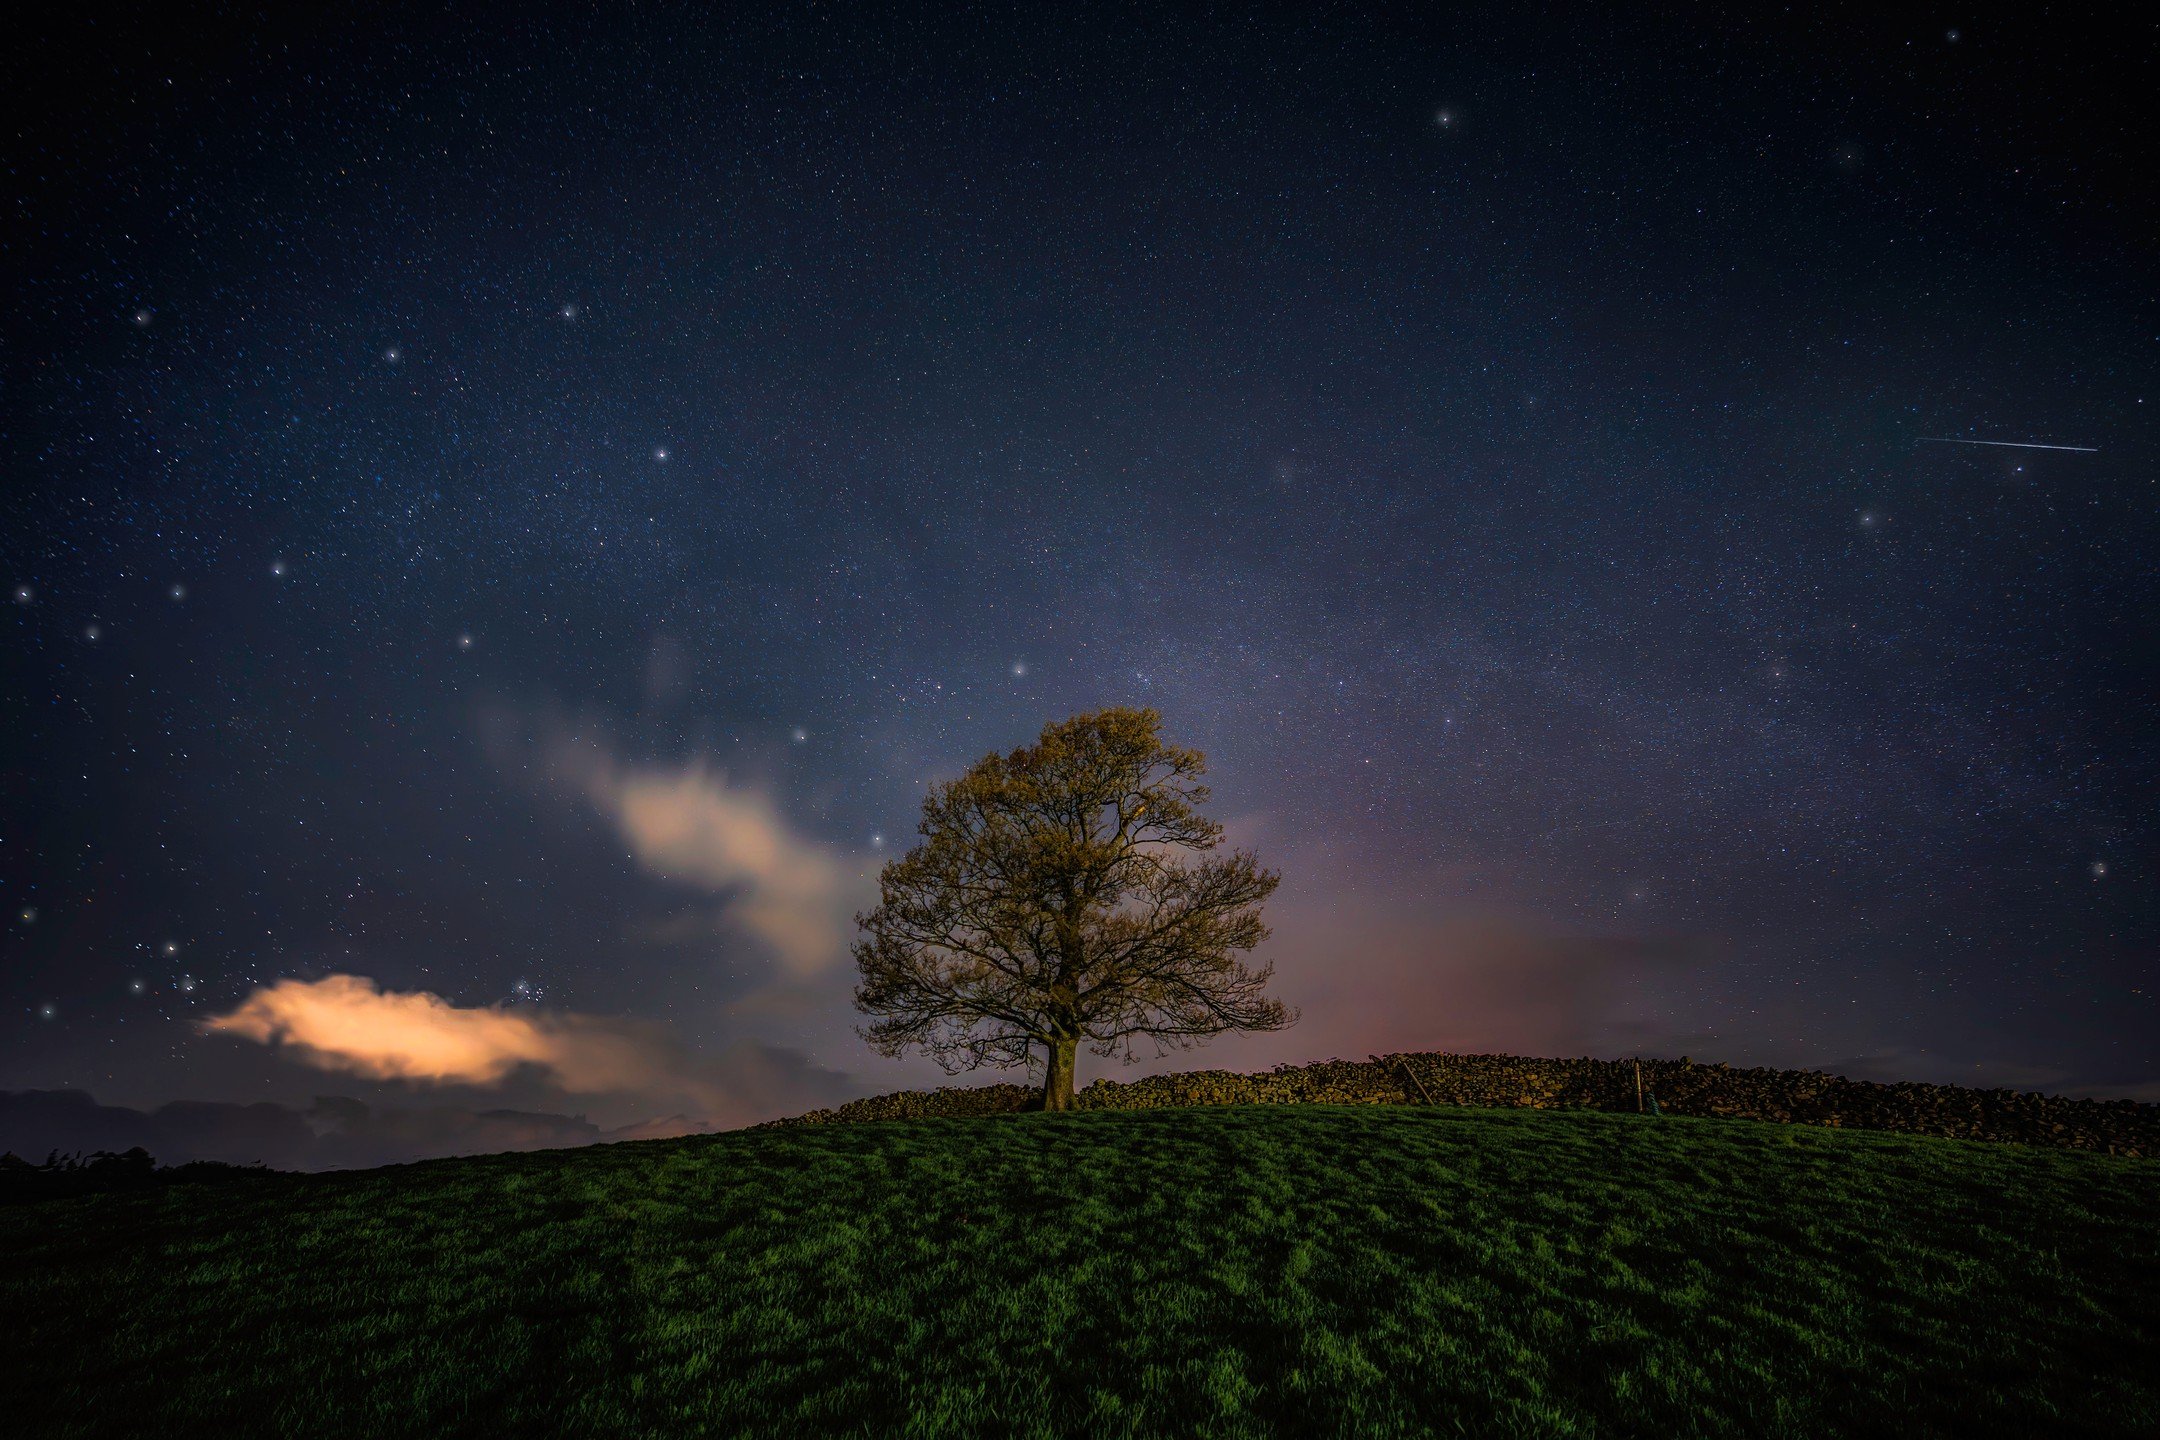 Burneside Oak Tree tonight - first time we've had clear skies for sometime! Really nice faint Milky Way and a shooting star tonight.⁣
⁣
#nightime #astrophotography #sonyshooter #astromilkyway #milkyway #sonyalpha #thestormhour #nighttimephotography #